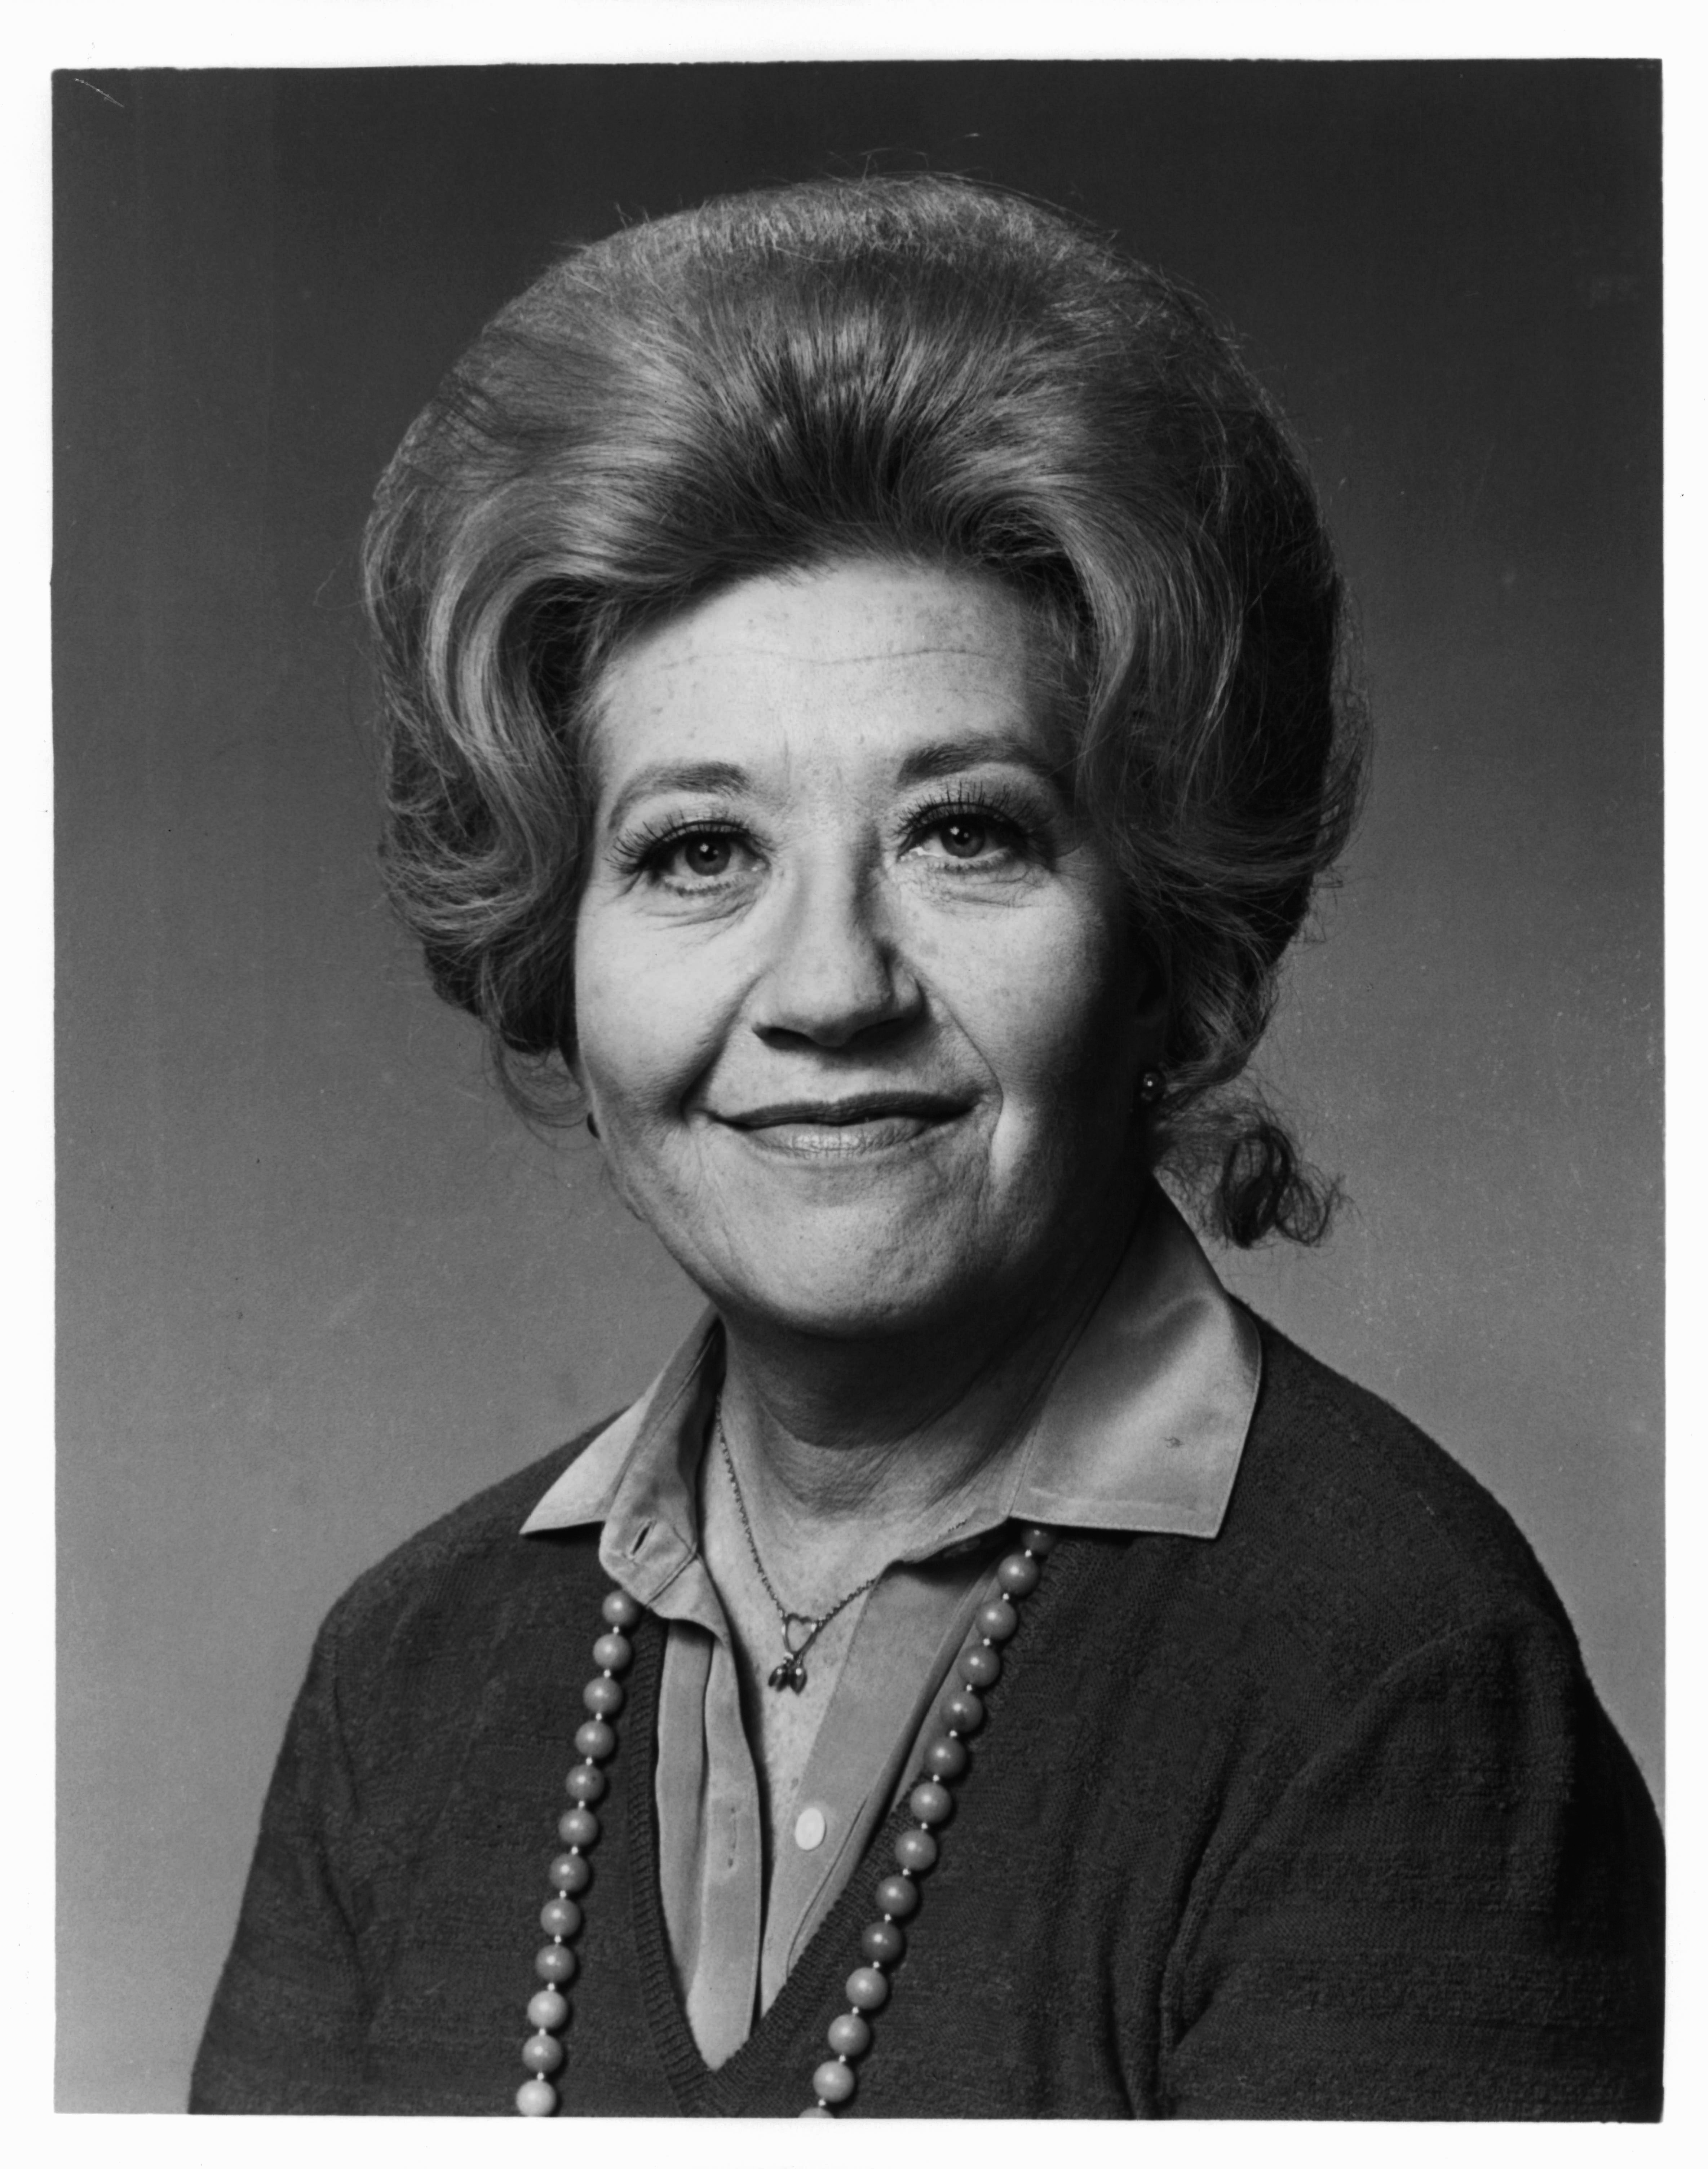 Charlotte Rae in a publicity portrait from the television series 'The Facts Of Life', 1980. | Source: Getty Images